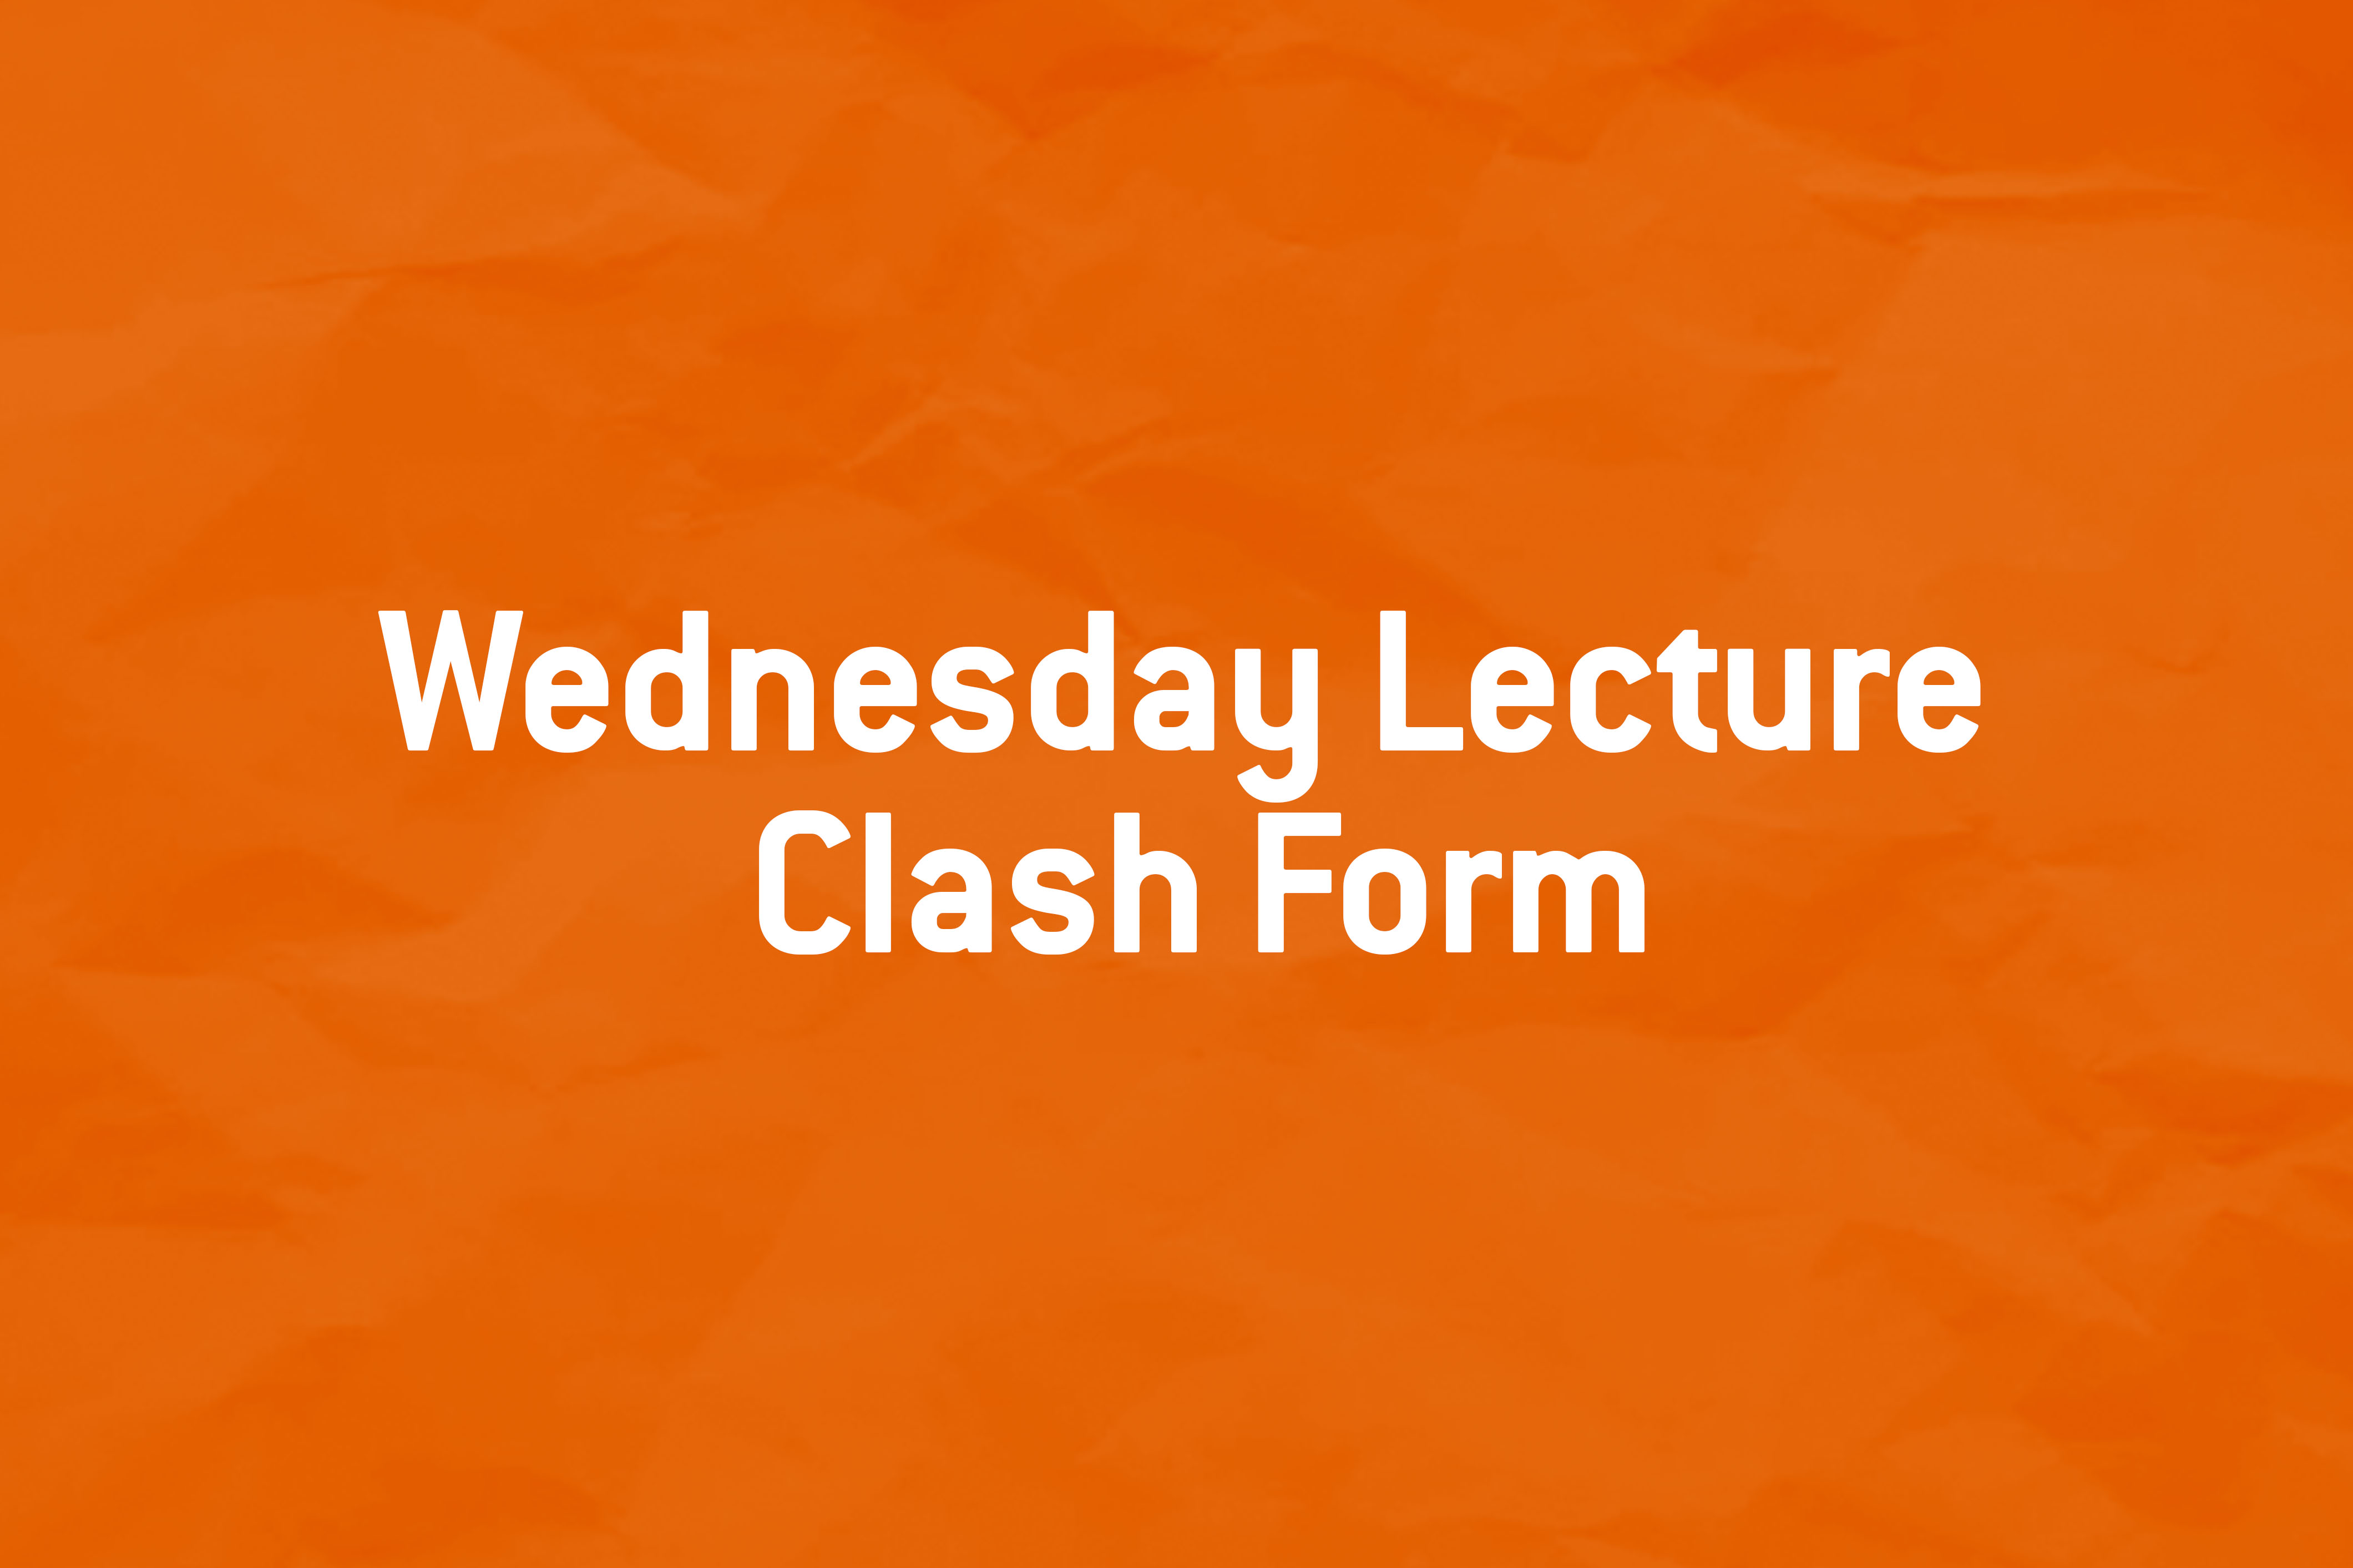 Wednesday Lecture Clash Form